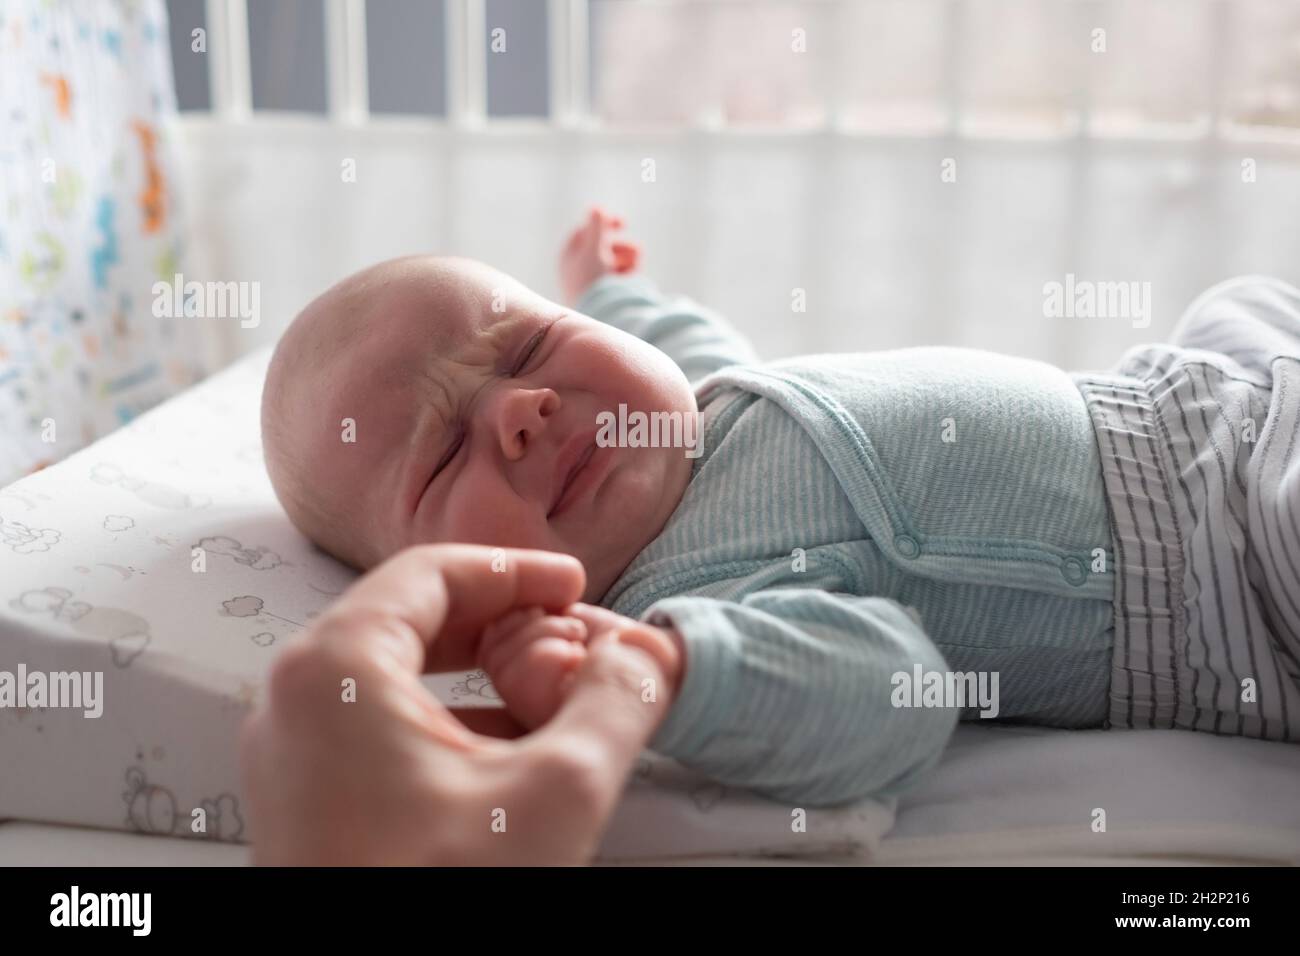 Crying caucasian baby on a bed suffering from colic pain. Stock Photo